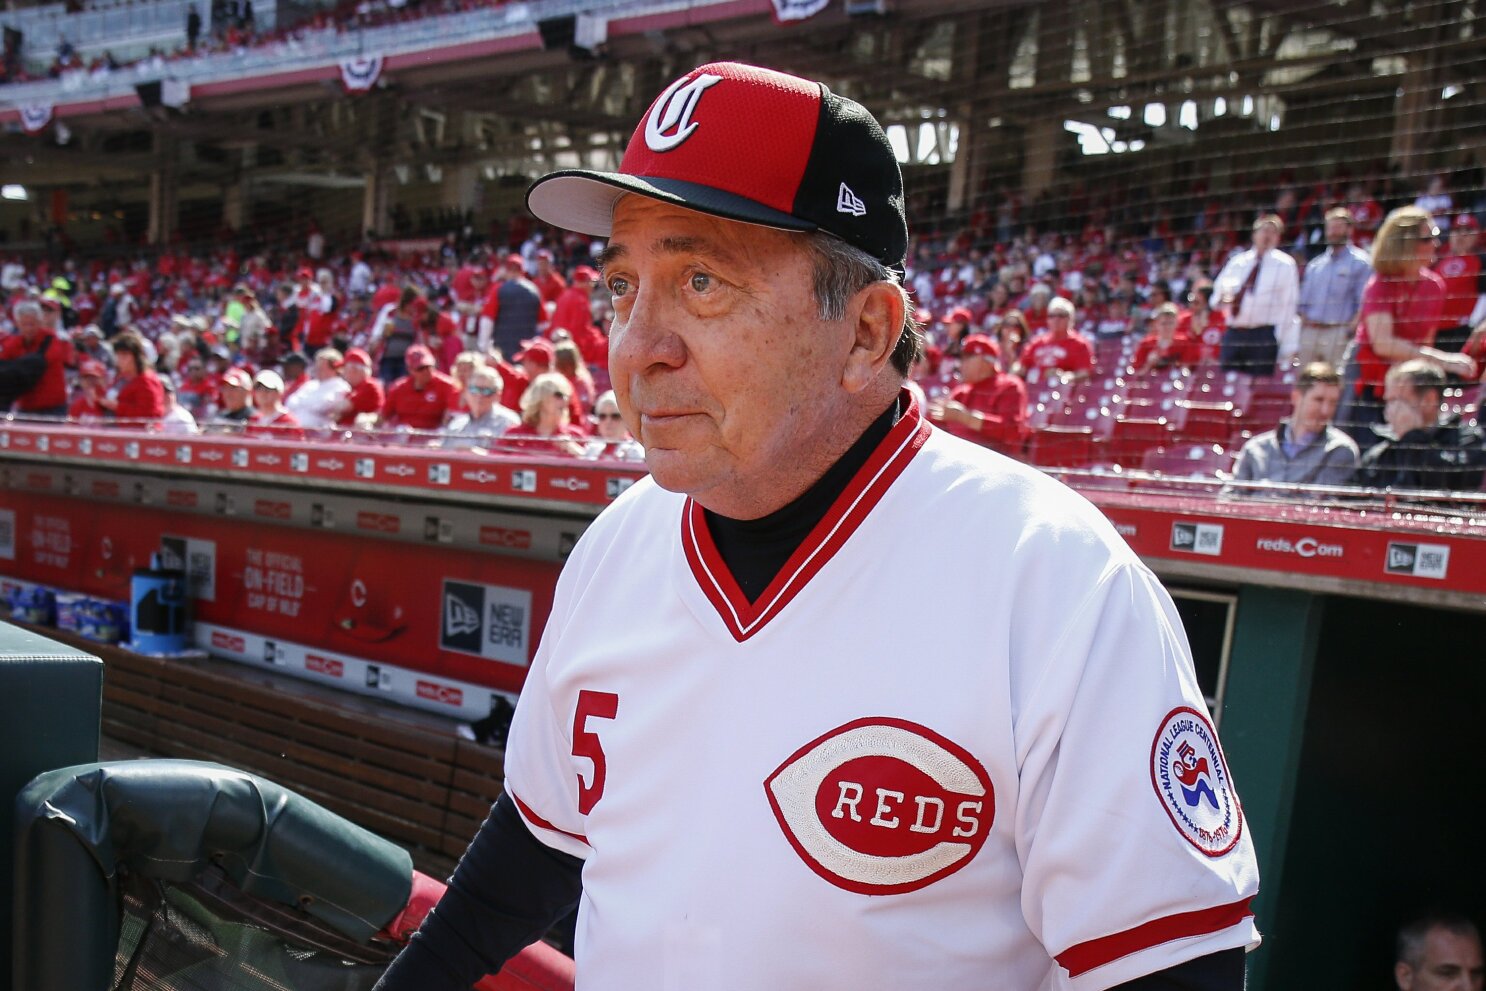 76ers fan to give memorabilia back to Johnny Bench